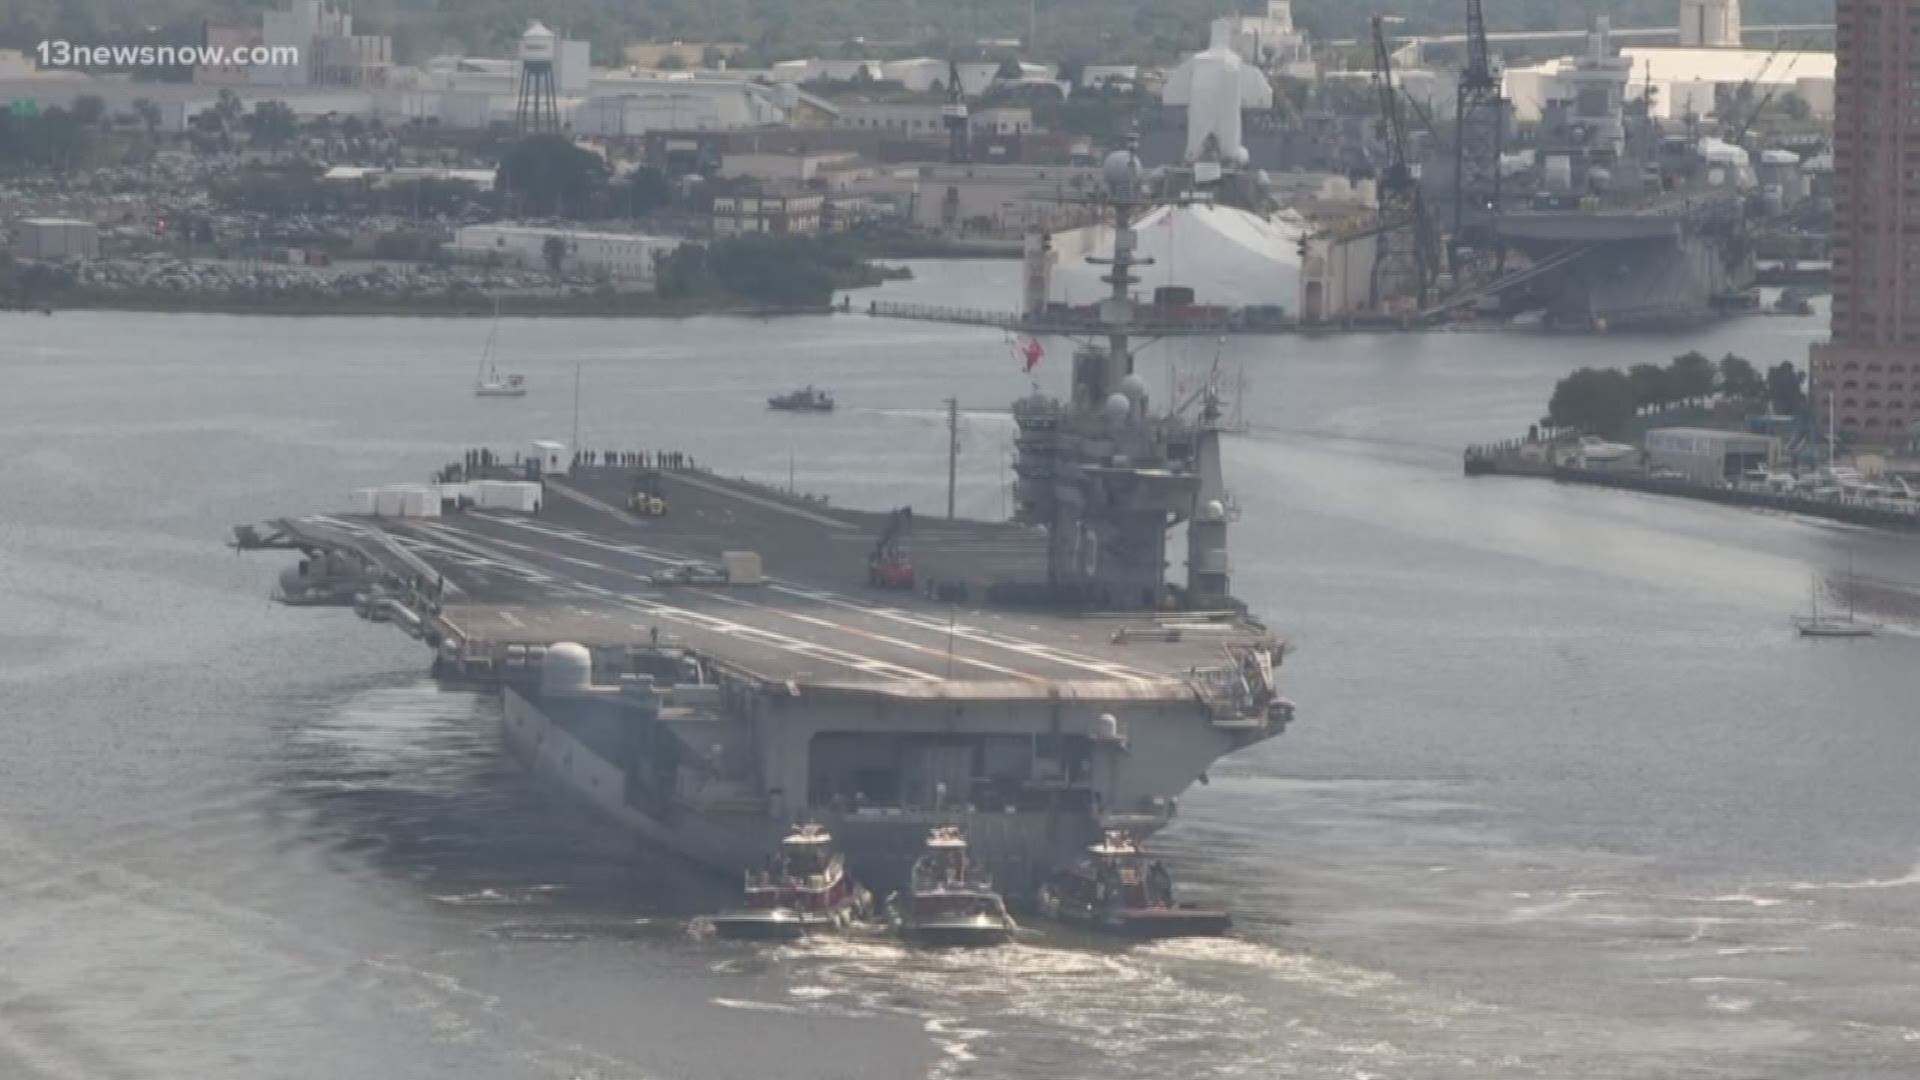 The closest aircraft carrier to the Middle East is the Norfolk-based USS Harry S. Truman. Six of the nine squadrons on the ship are from Hampton Roads.